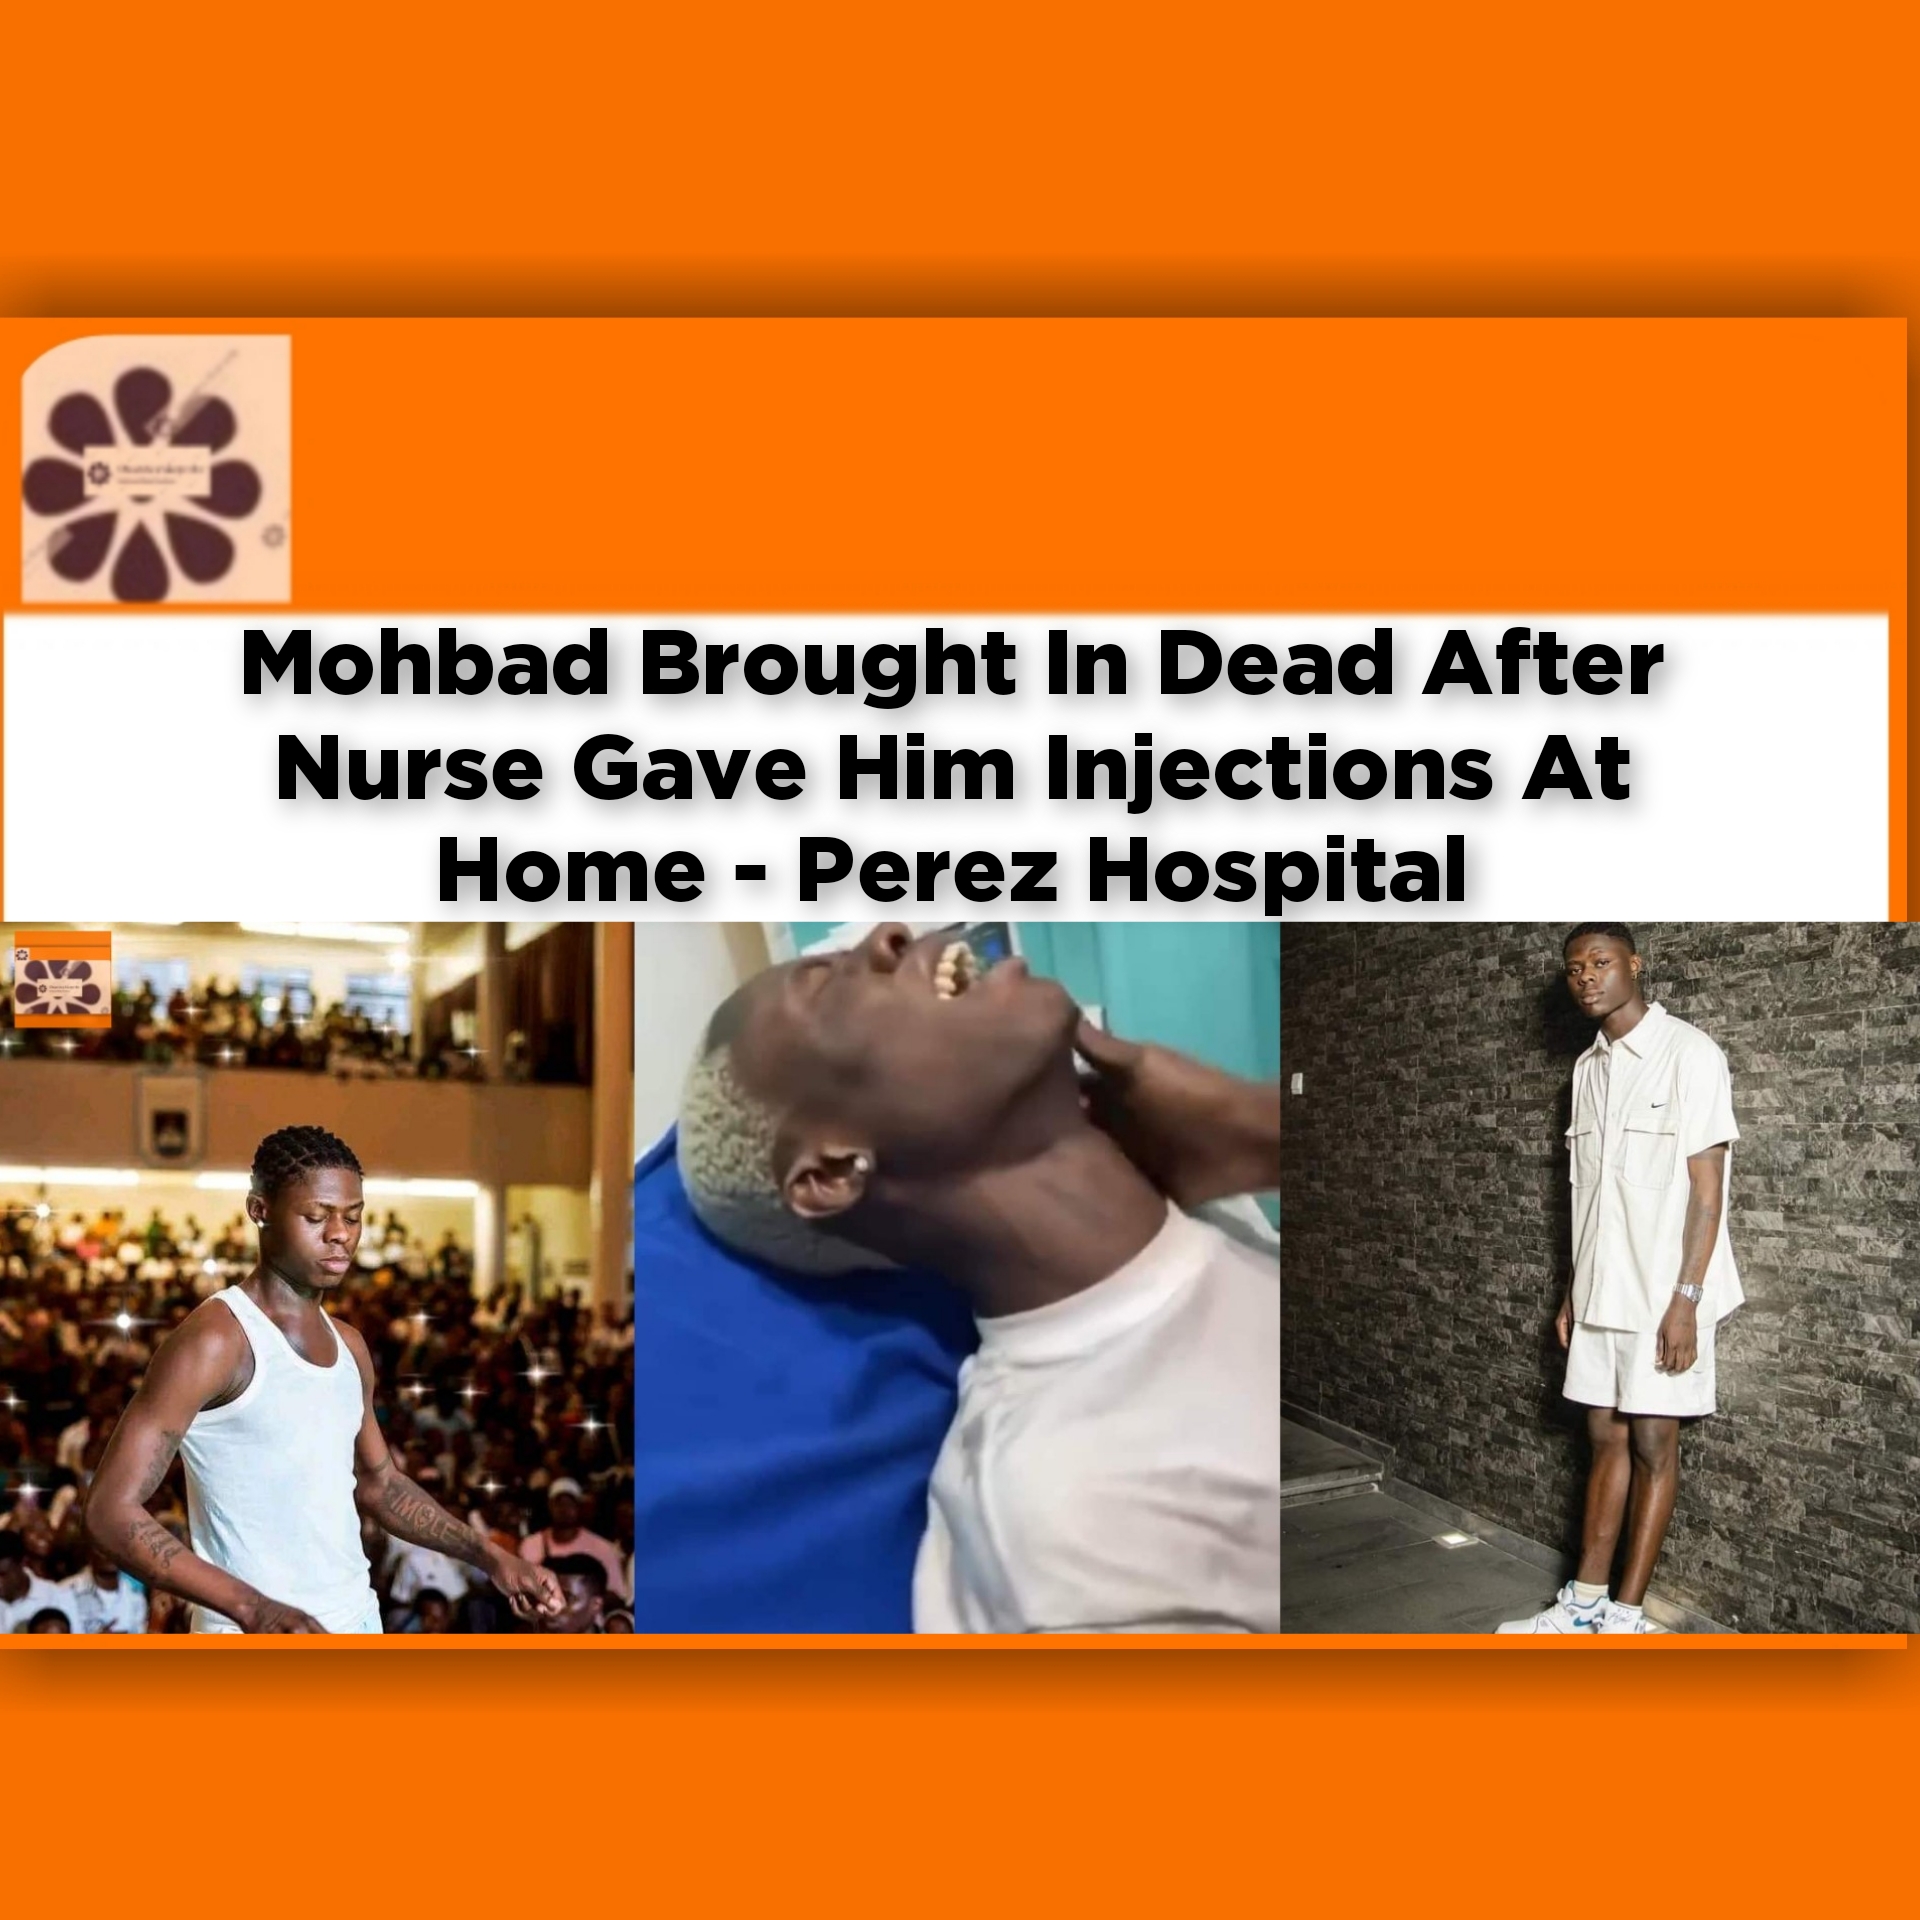 Mohbad Brought In Dead After Nurse Gave Him Injections At Home - Perez Hospital ~ OsazuwaAkonedo Columns